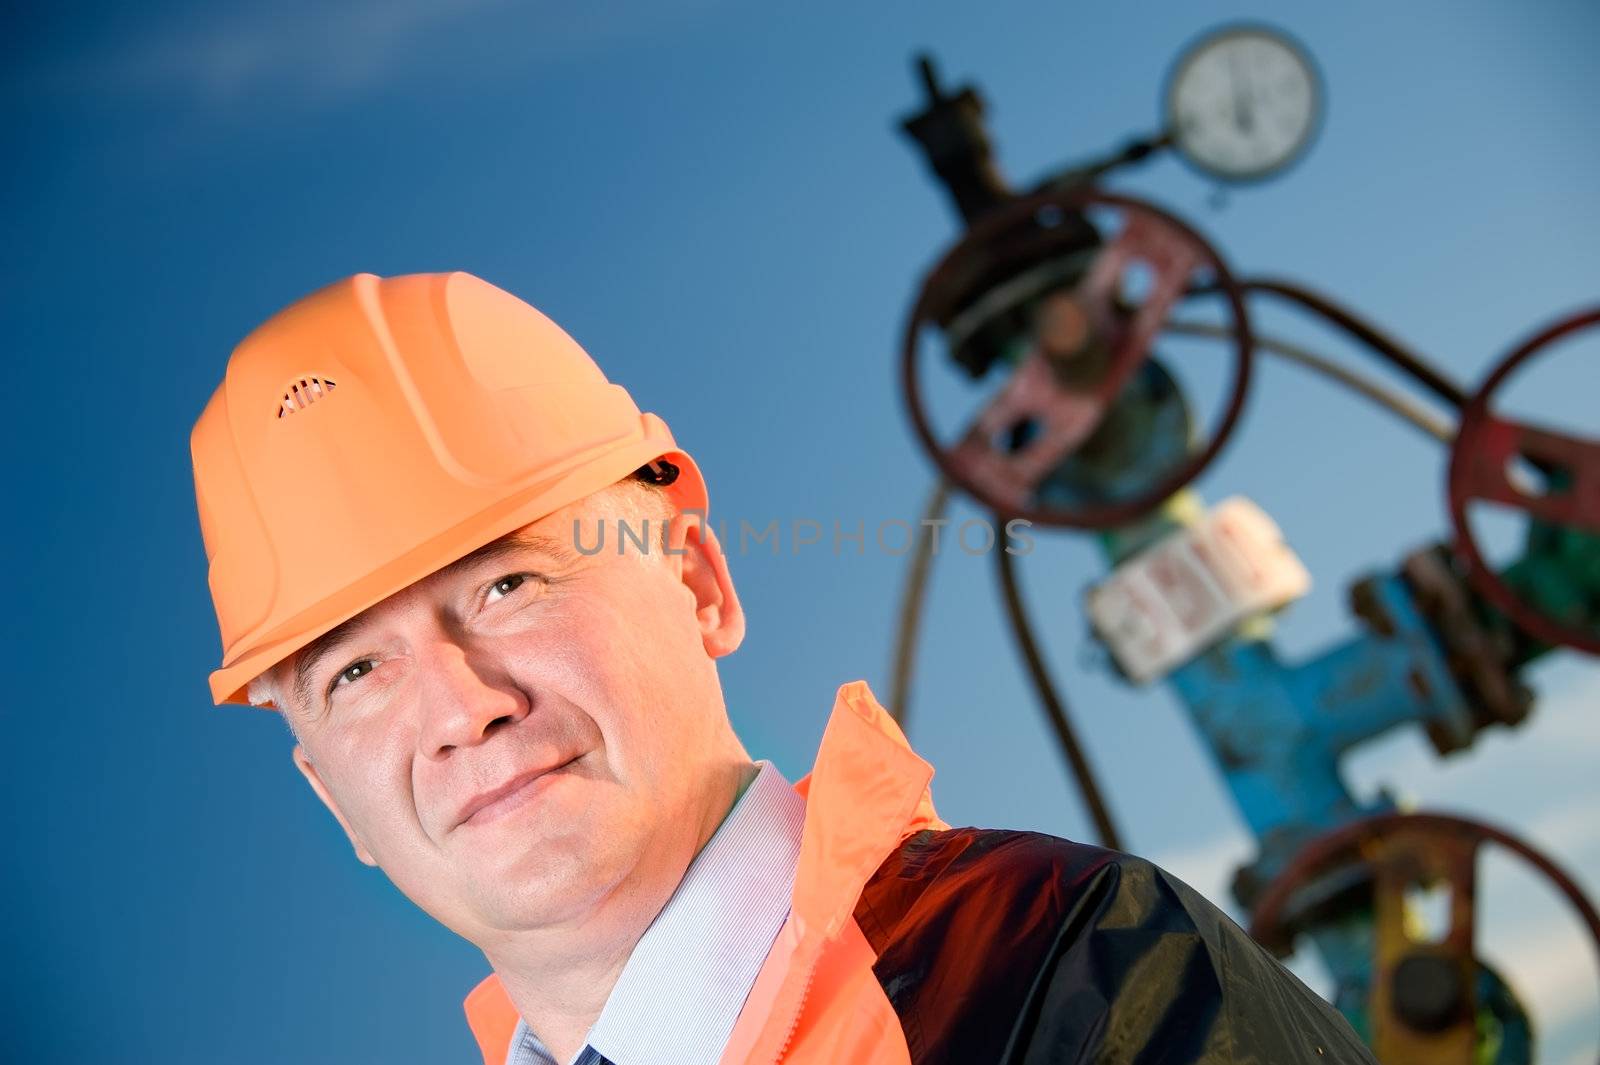 Oil worker in orange uniform and helmet on of background the valves, piping and sunset sky.